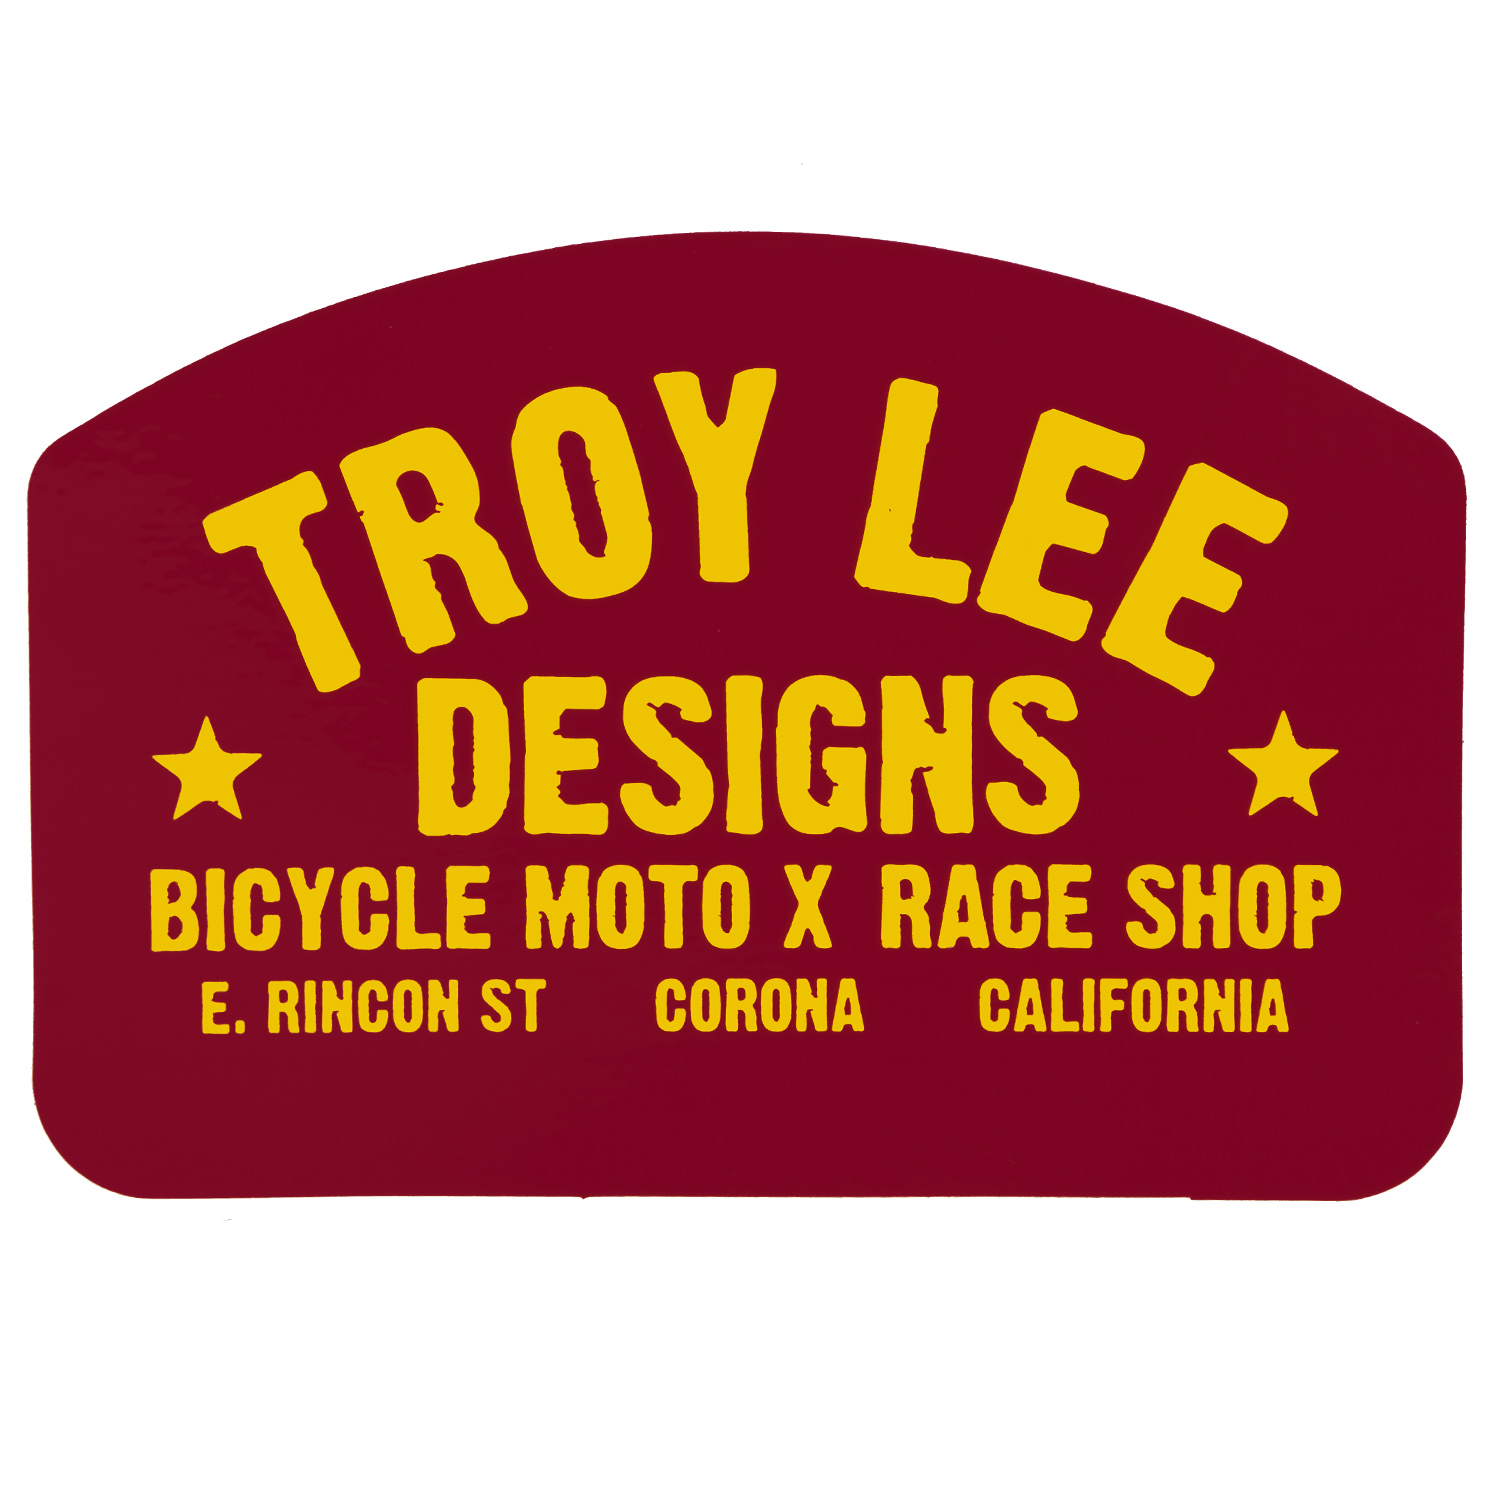 Troy Lee Designs Sticker Race Shop Red/Yellow - 6.5 inches